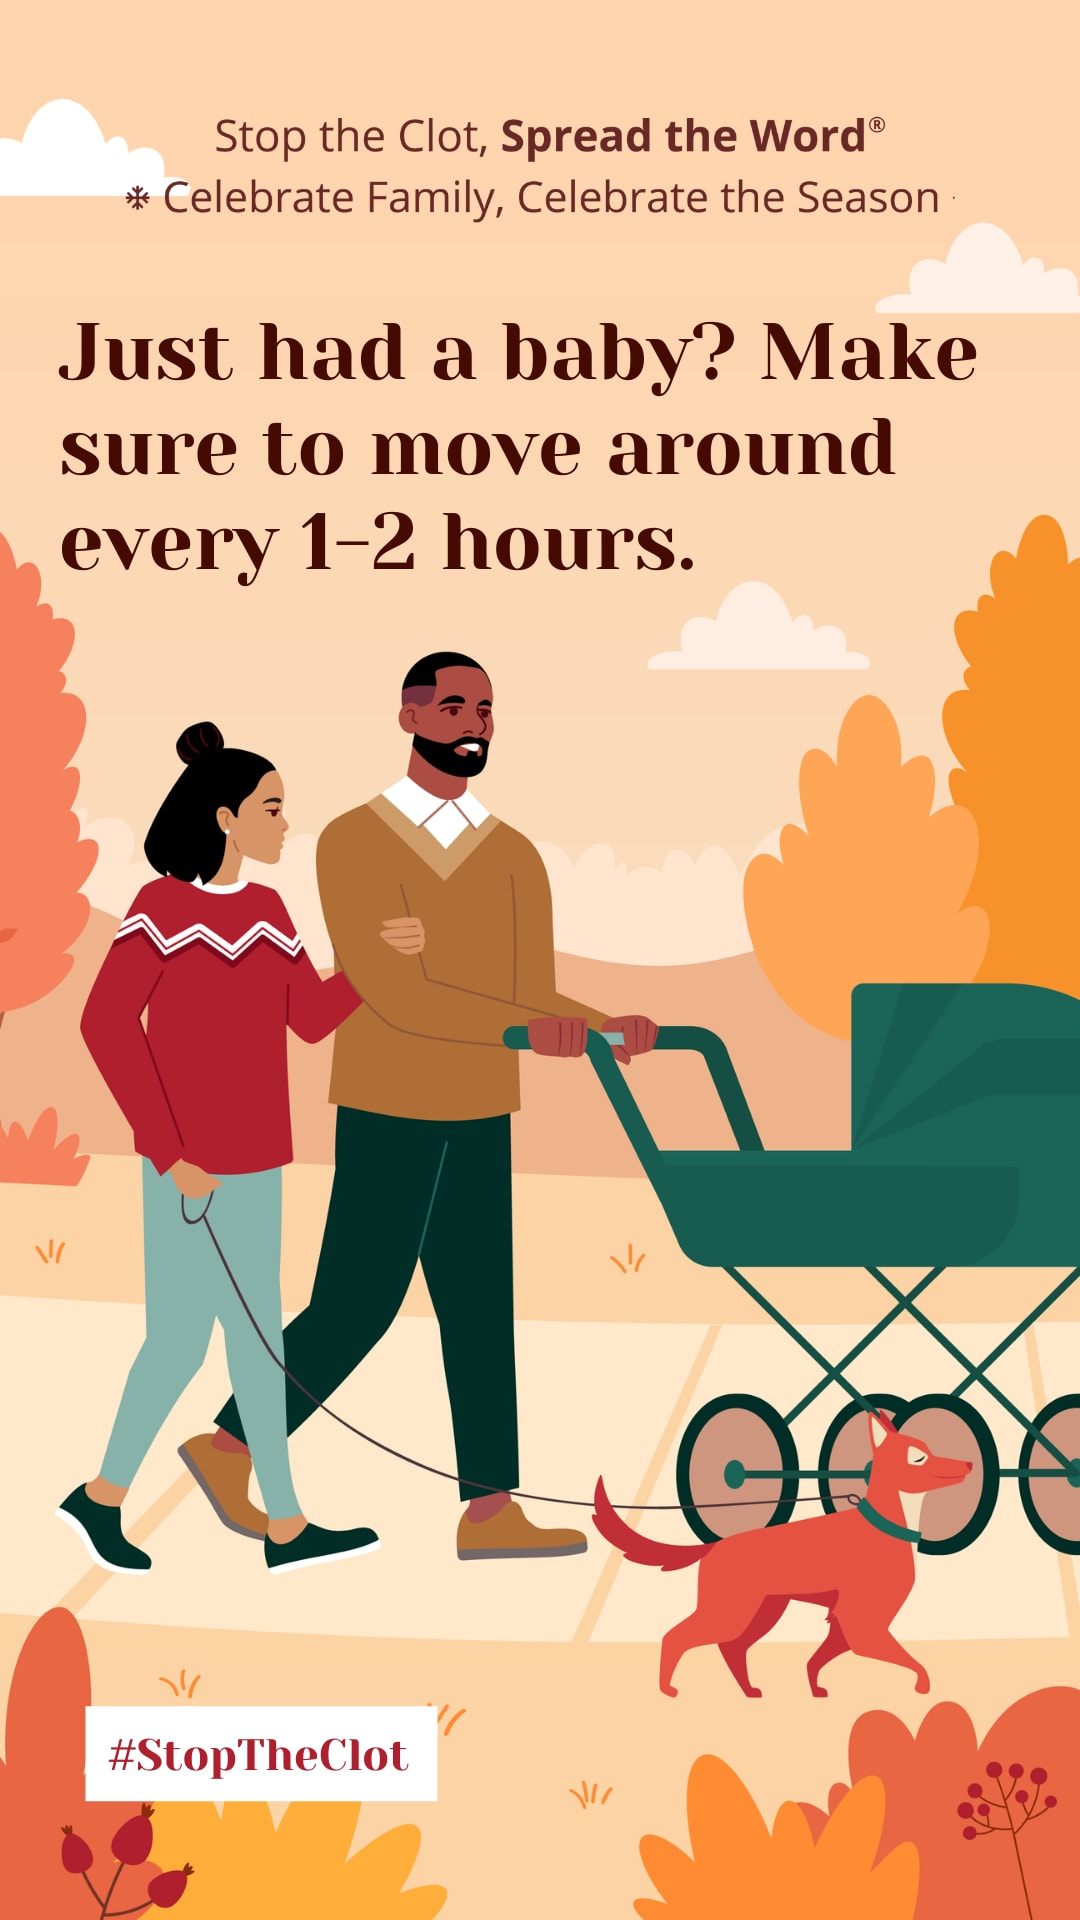 Illustration of new parents walking with their baby in a stroller. Just had a baby? Make sure to move around every 1 - 2 hours.